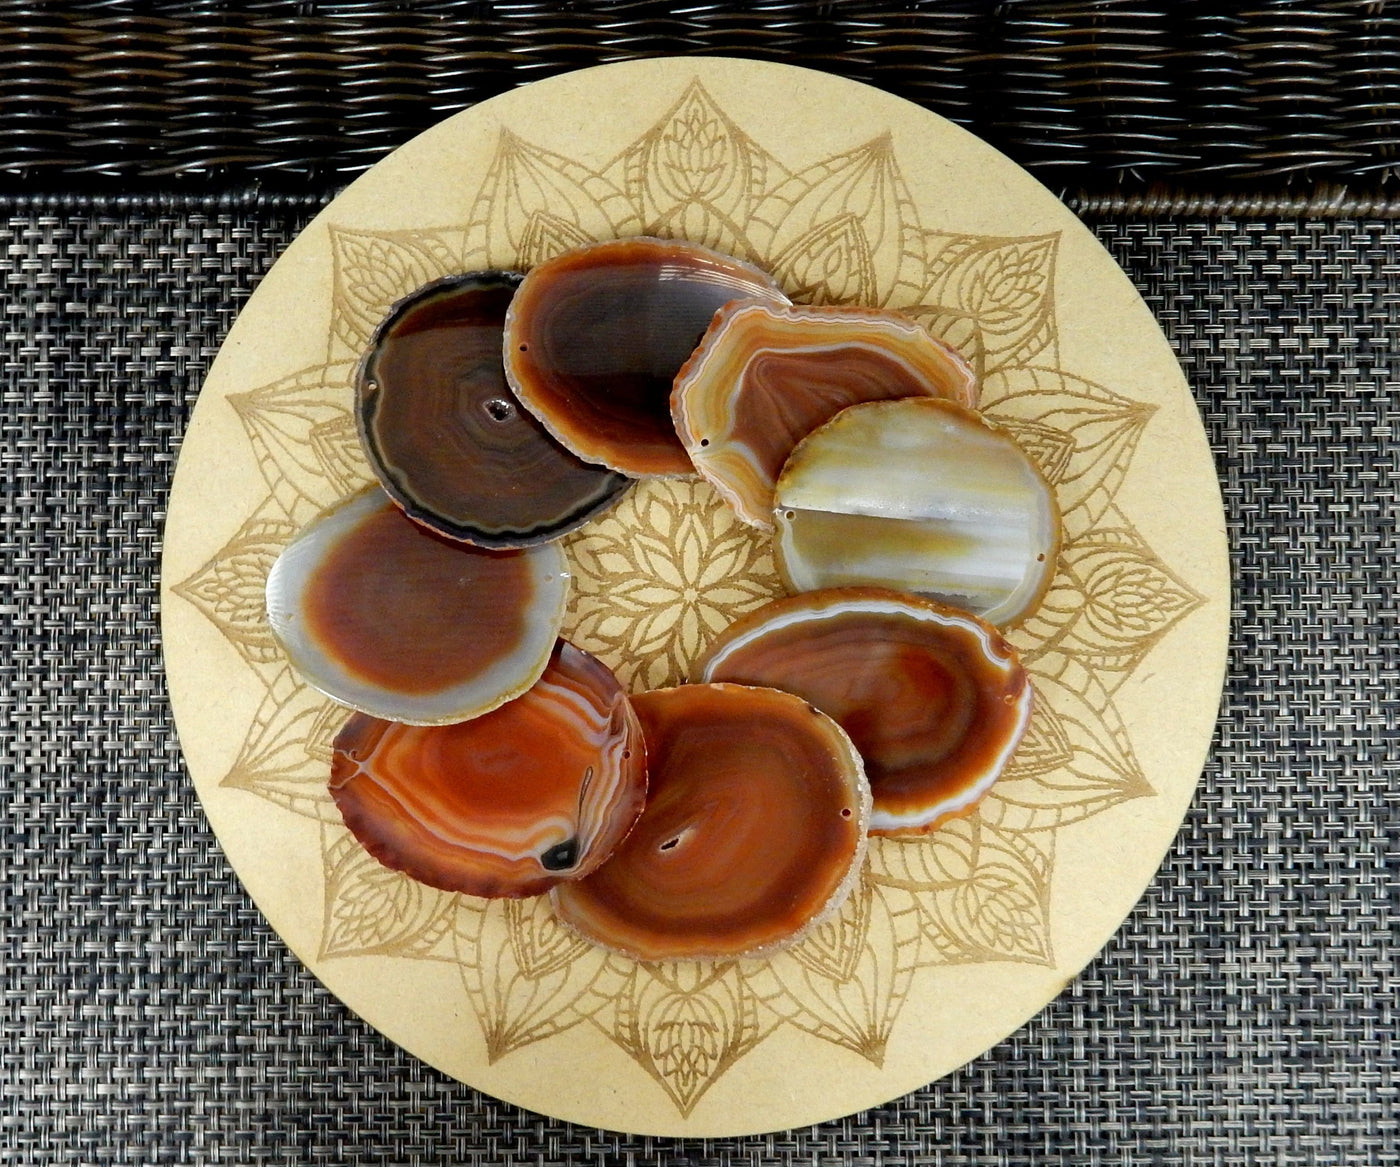 red/orange agate slices being displayed on a wooden grid.